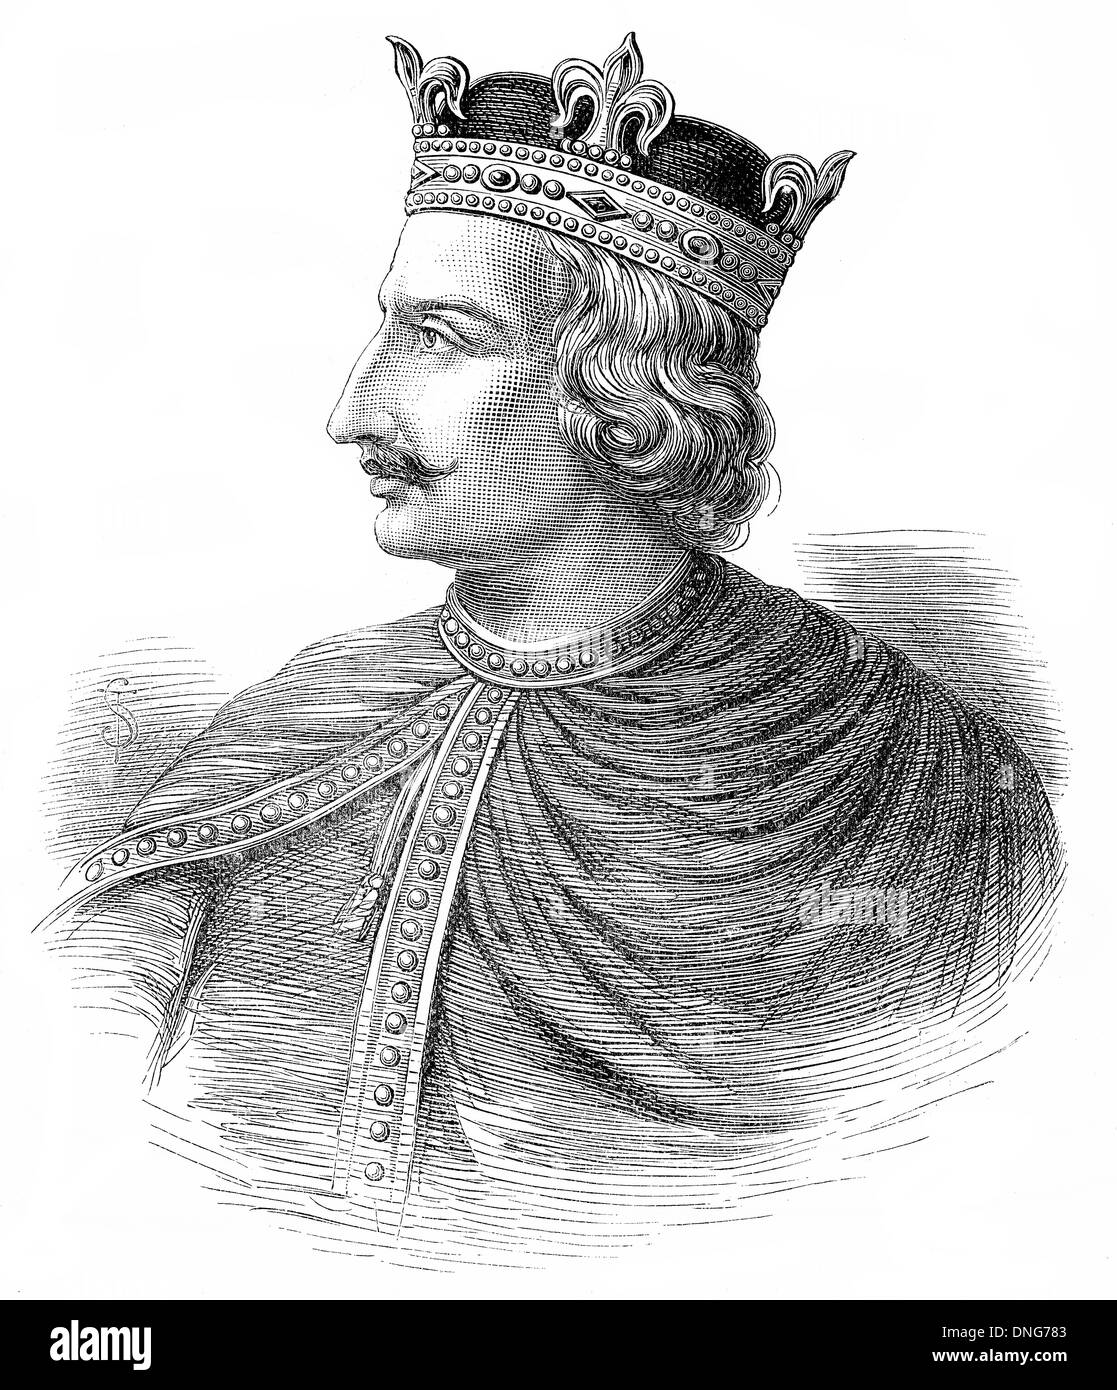 Henry I or Henry Beauclerc, c. 1068 - 1135, King of England from 1100 to 1135, Stock Photo